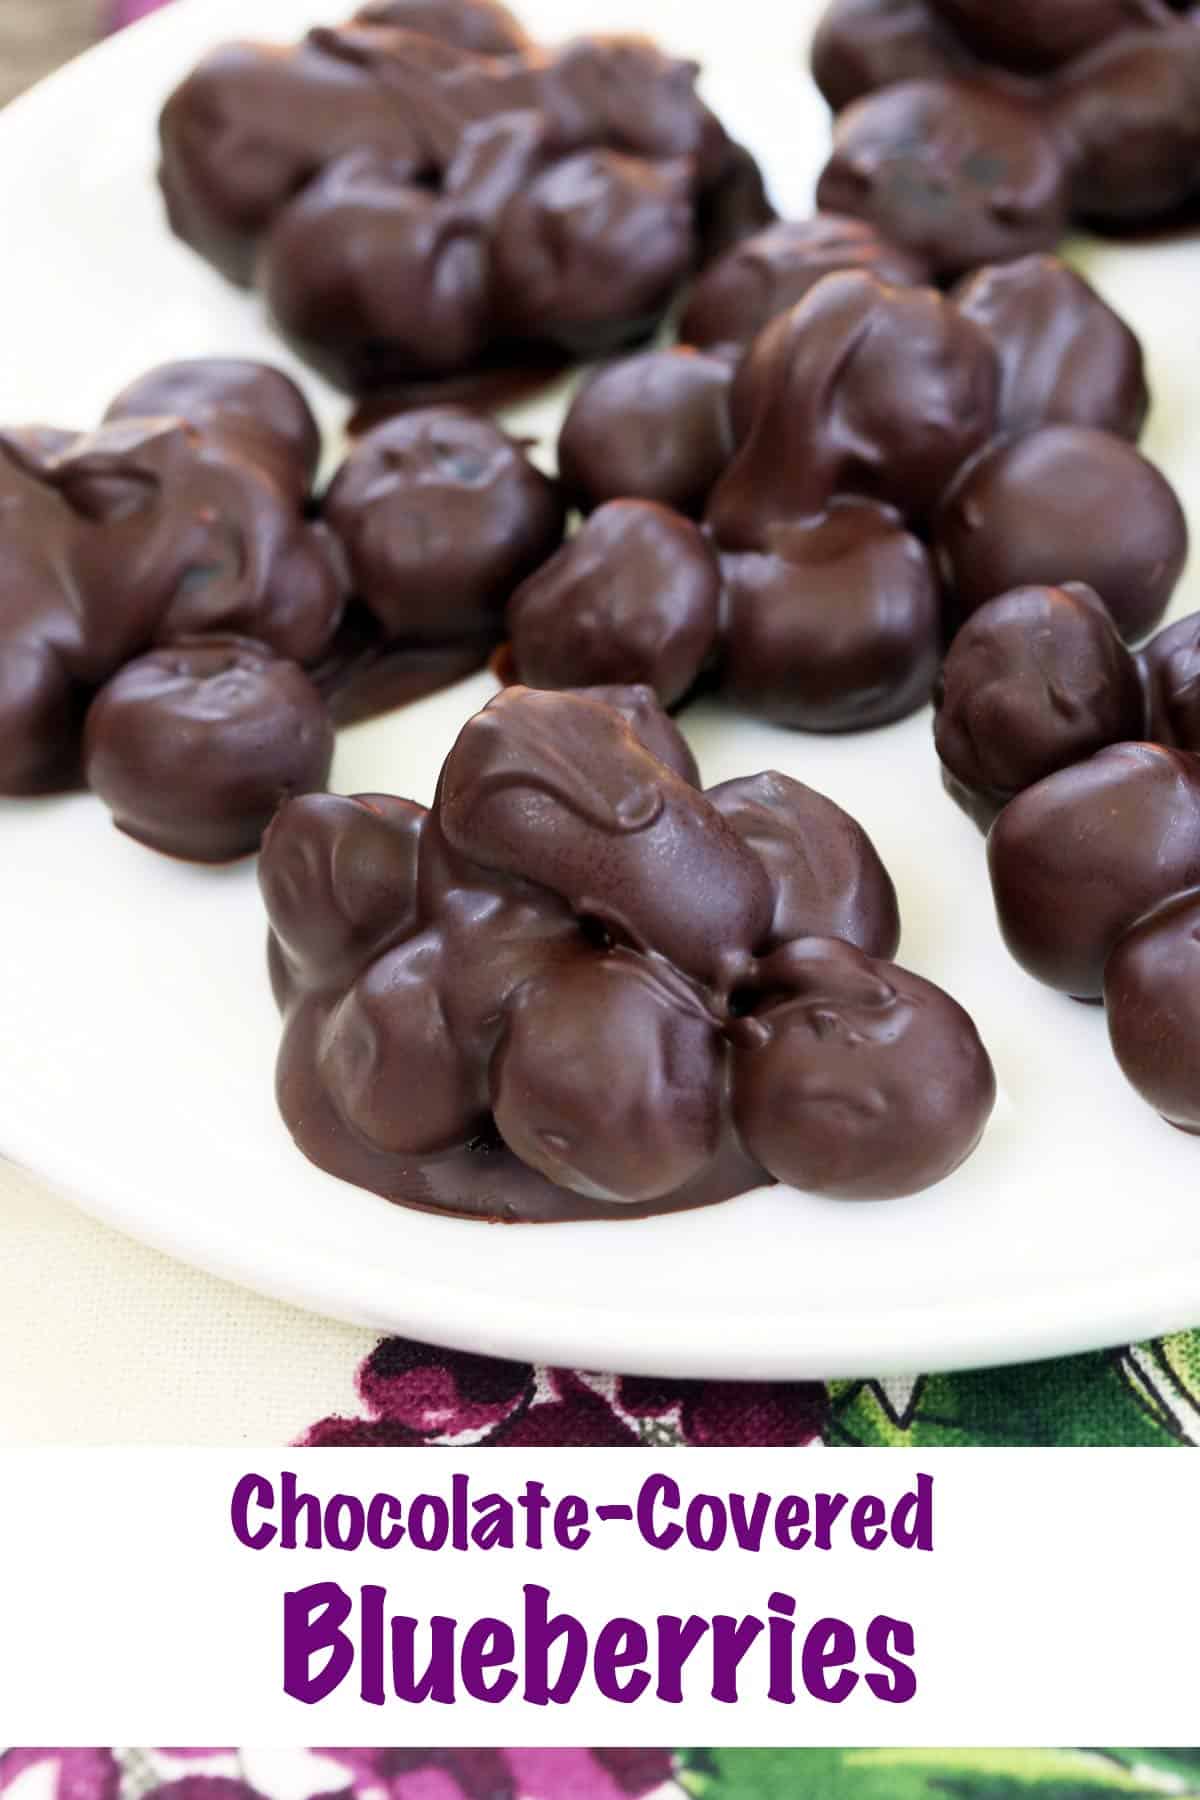 Chocolate-Covered Blueberries - Healthy Recipes Blog